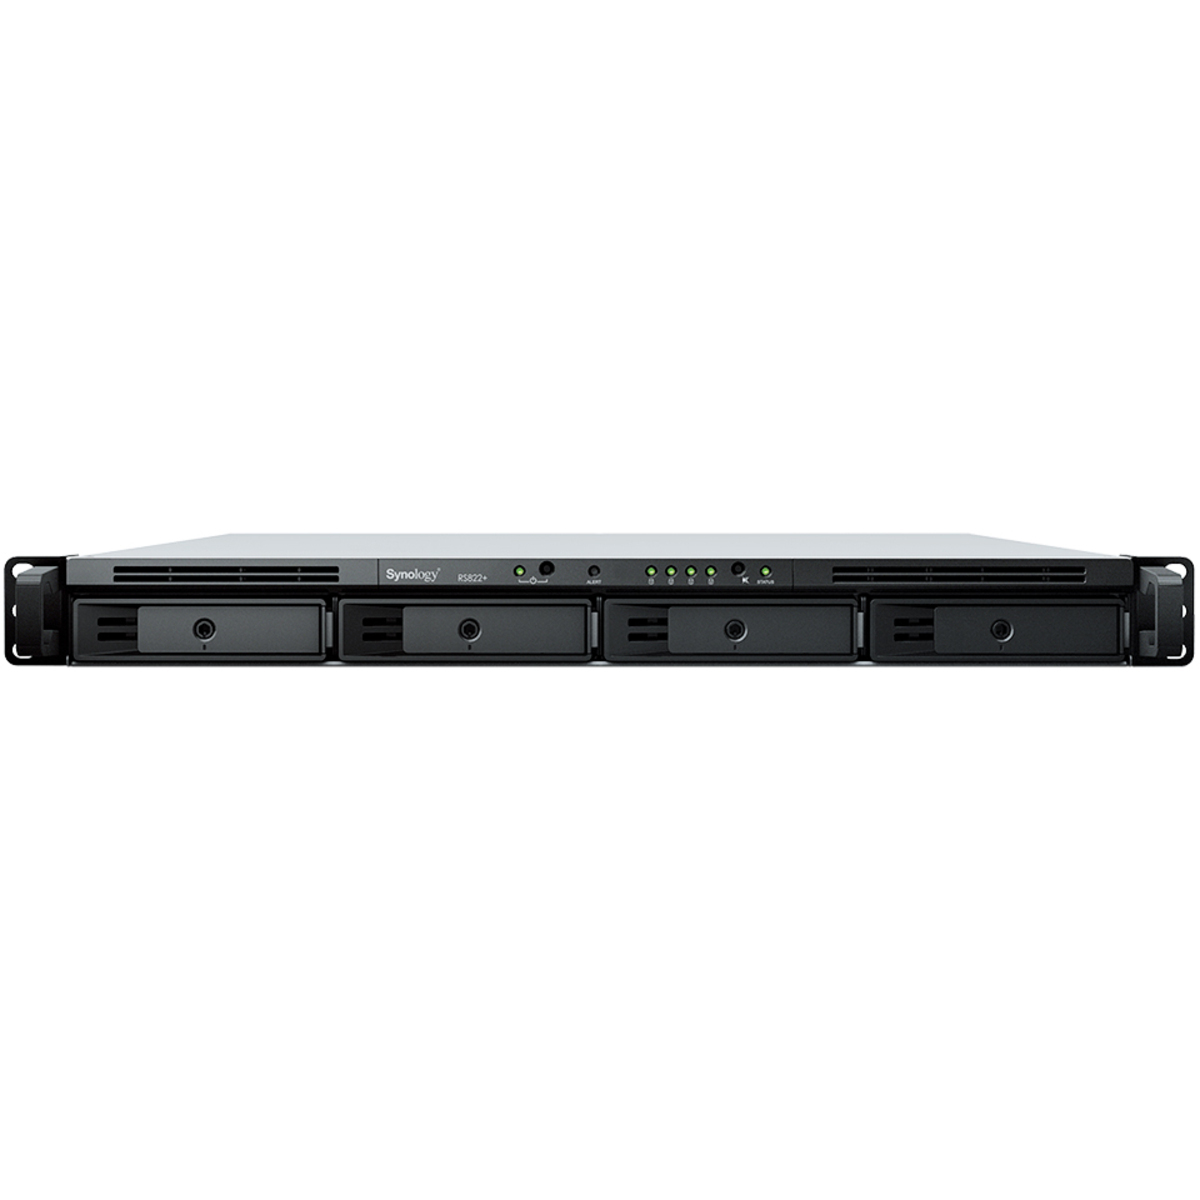 Synology RackStation RS822RP+ 56tb 4-Bay RackMount Multimedia / Power User / Business NAS - Network Attached Storage Device 4x14tb Seagate IronWolf Pro ST14000NT001 3.5 7200rpm SATA 6Gb/s HDD NAS Class Drives Installed - Burn-In Tested - FREE RAM UPGRADE RackStation RS822RP+